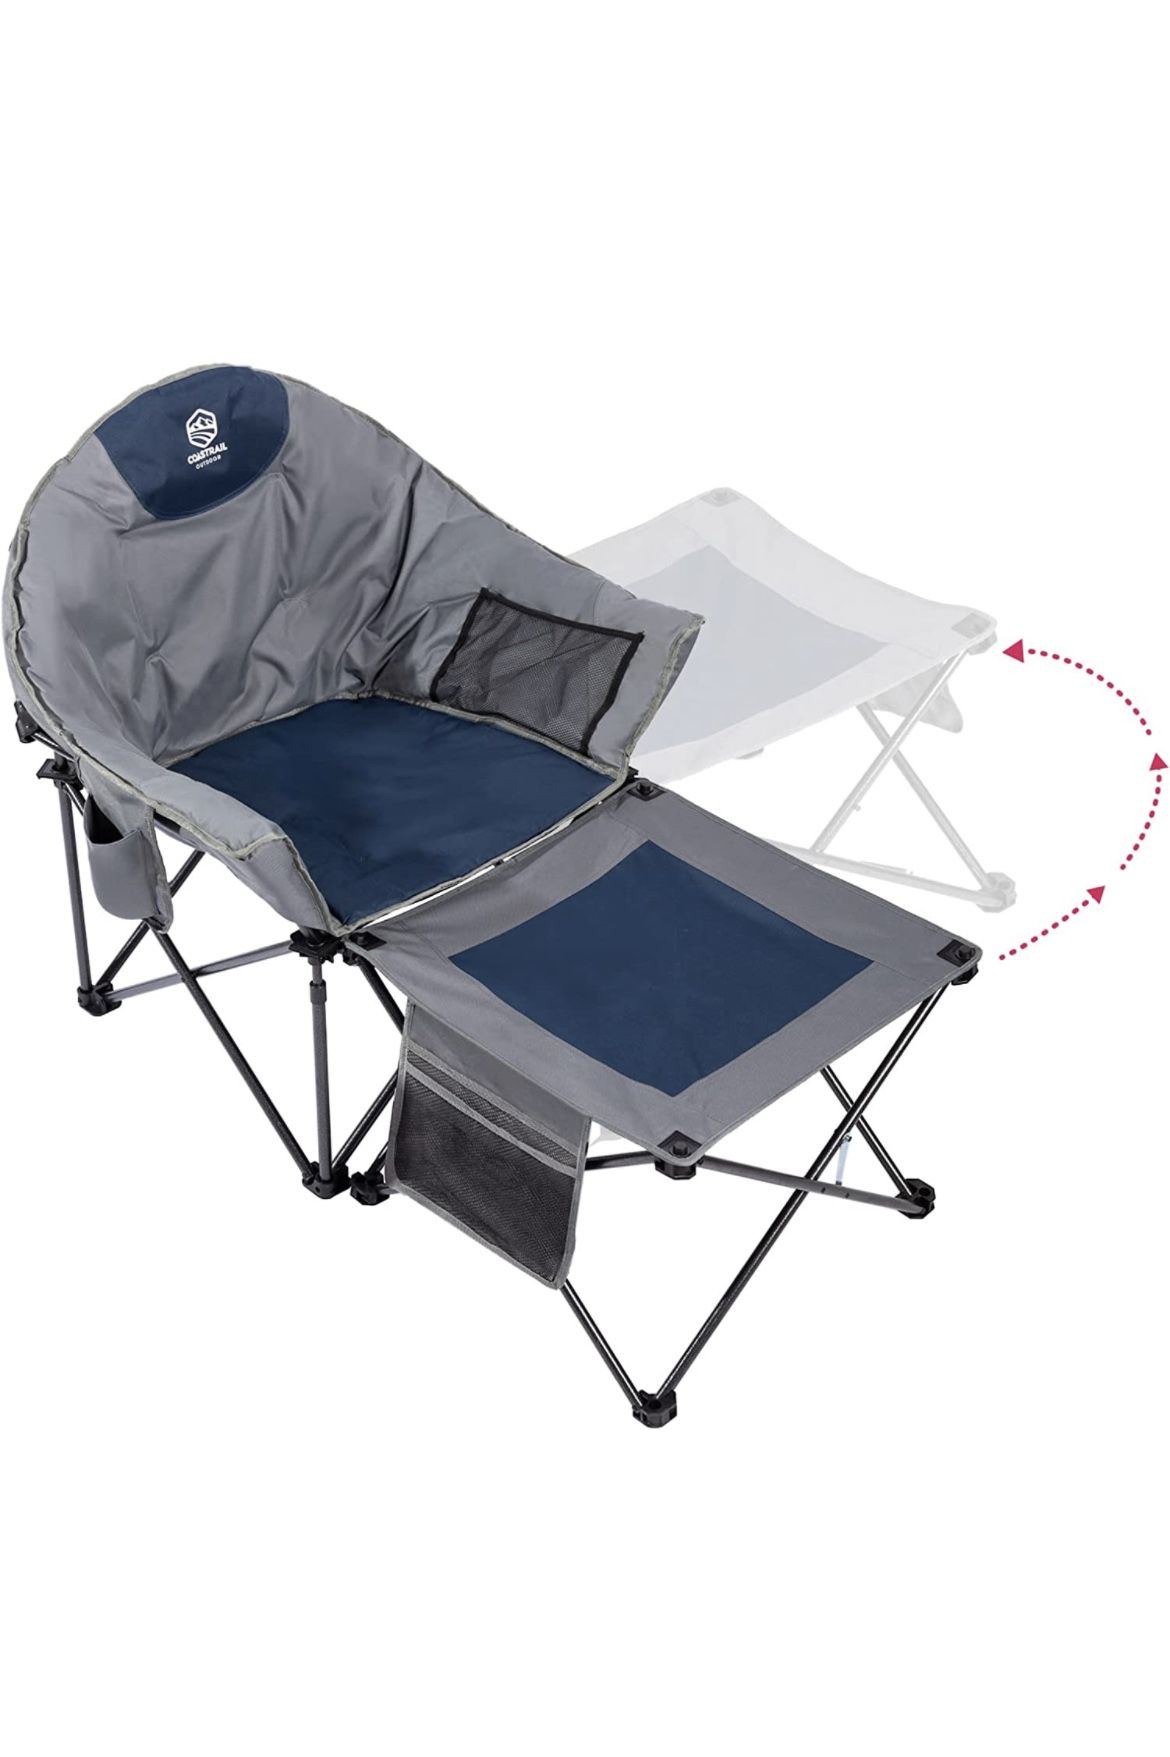 Oversized Outdoor Padded Folding Camping Chair 2 in 1 with Removable Footrest Round Moon Saucer Camp Chair with Cup Holder, Supports 350lbs